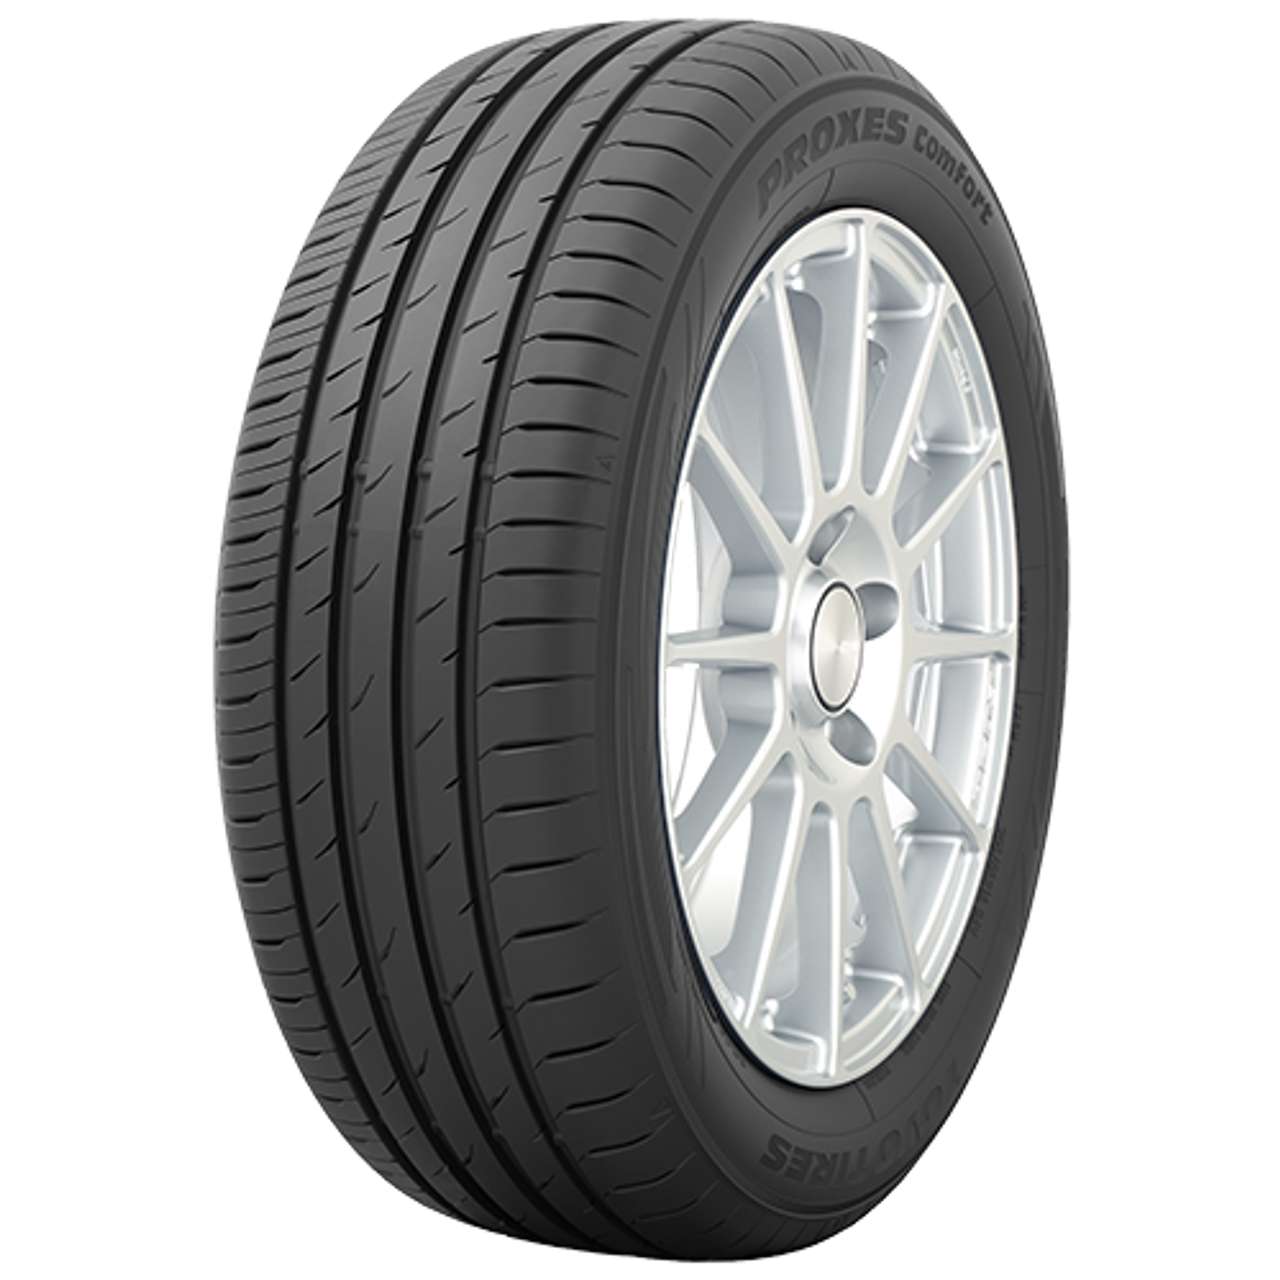 TOYO PROXES COMFORT 205/55R16 94V BSW XL